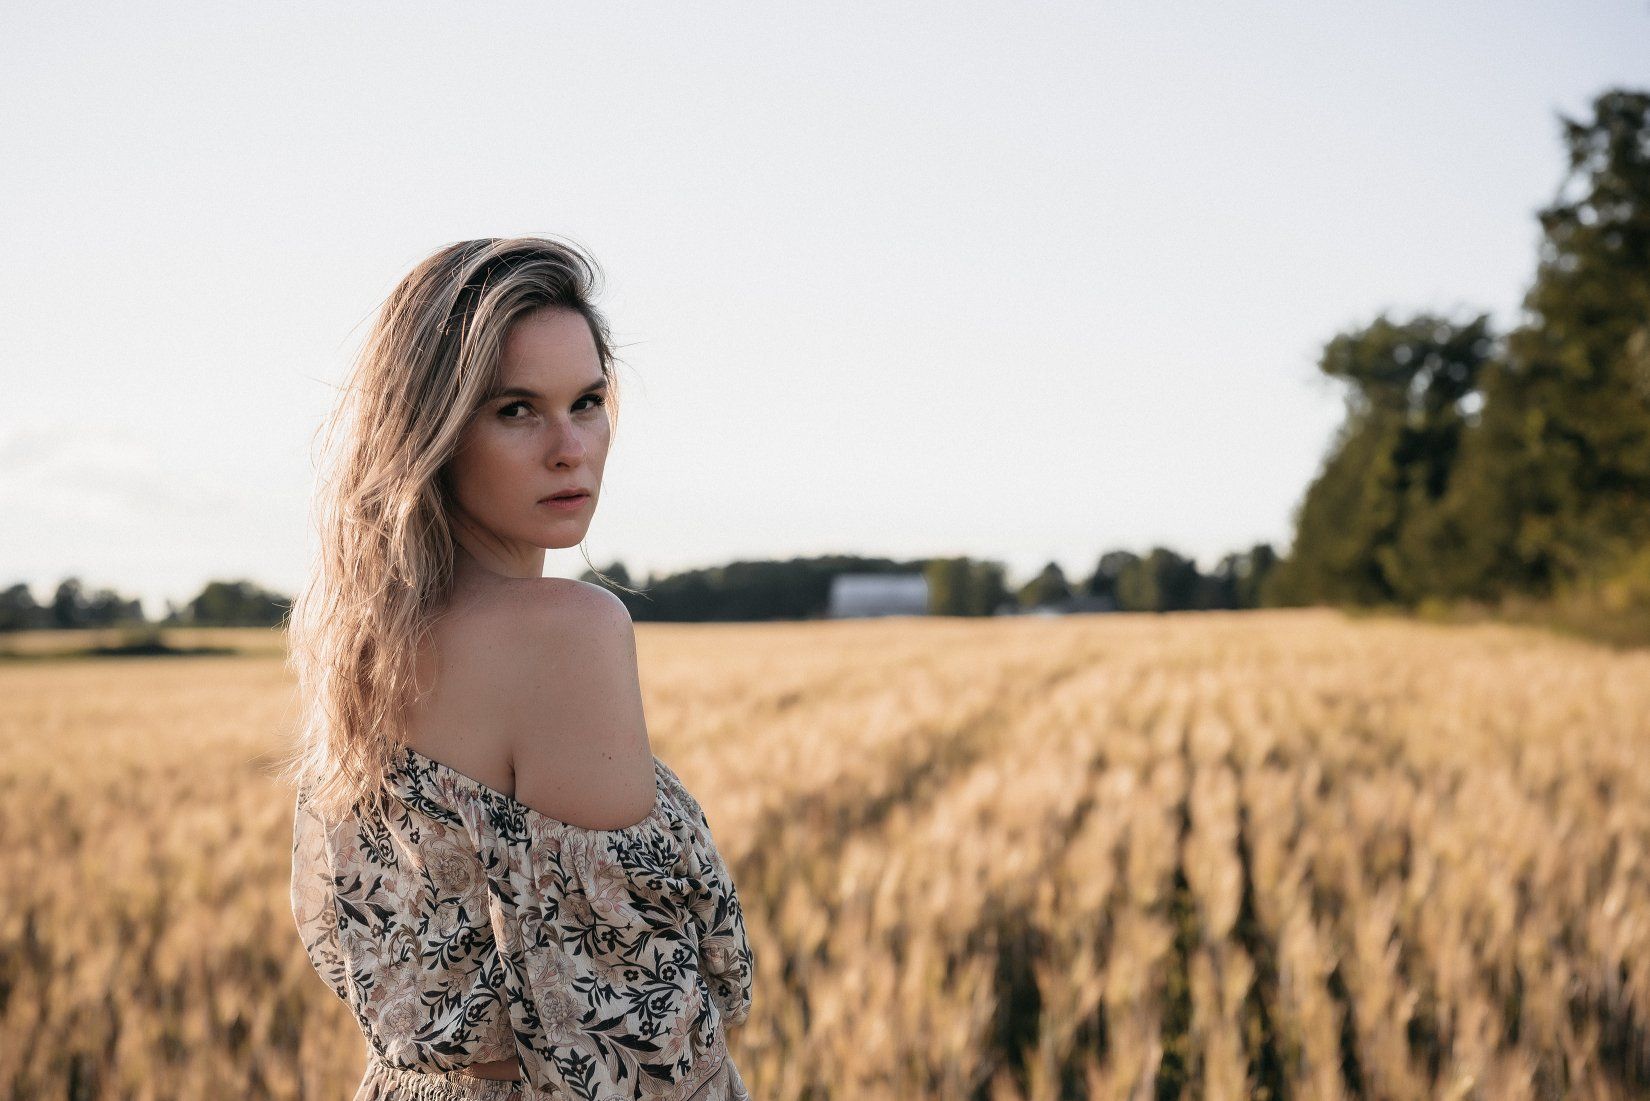 Personal branding photo of a blond woman looking back over her bare shoulder while standing in front of a field